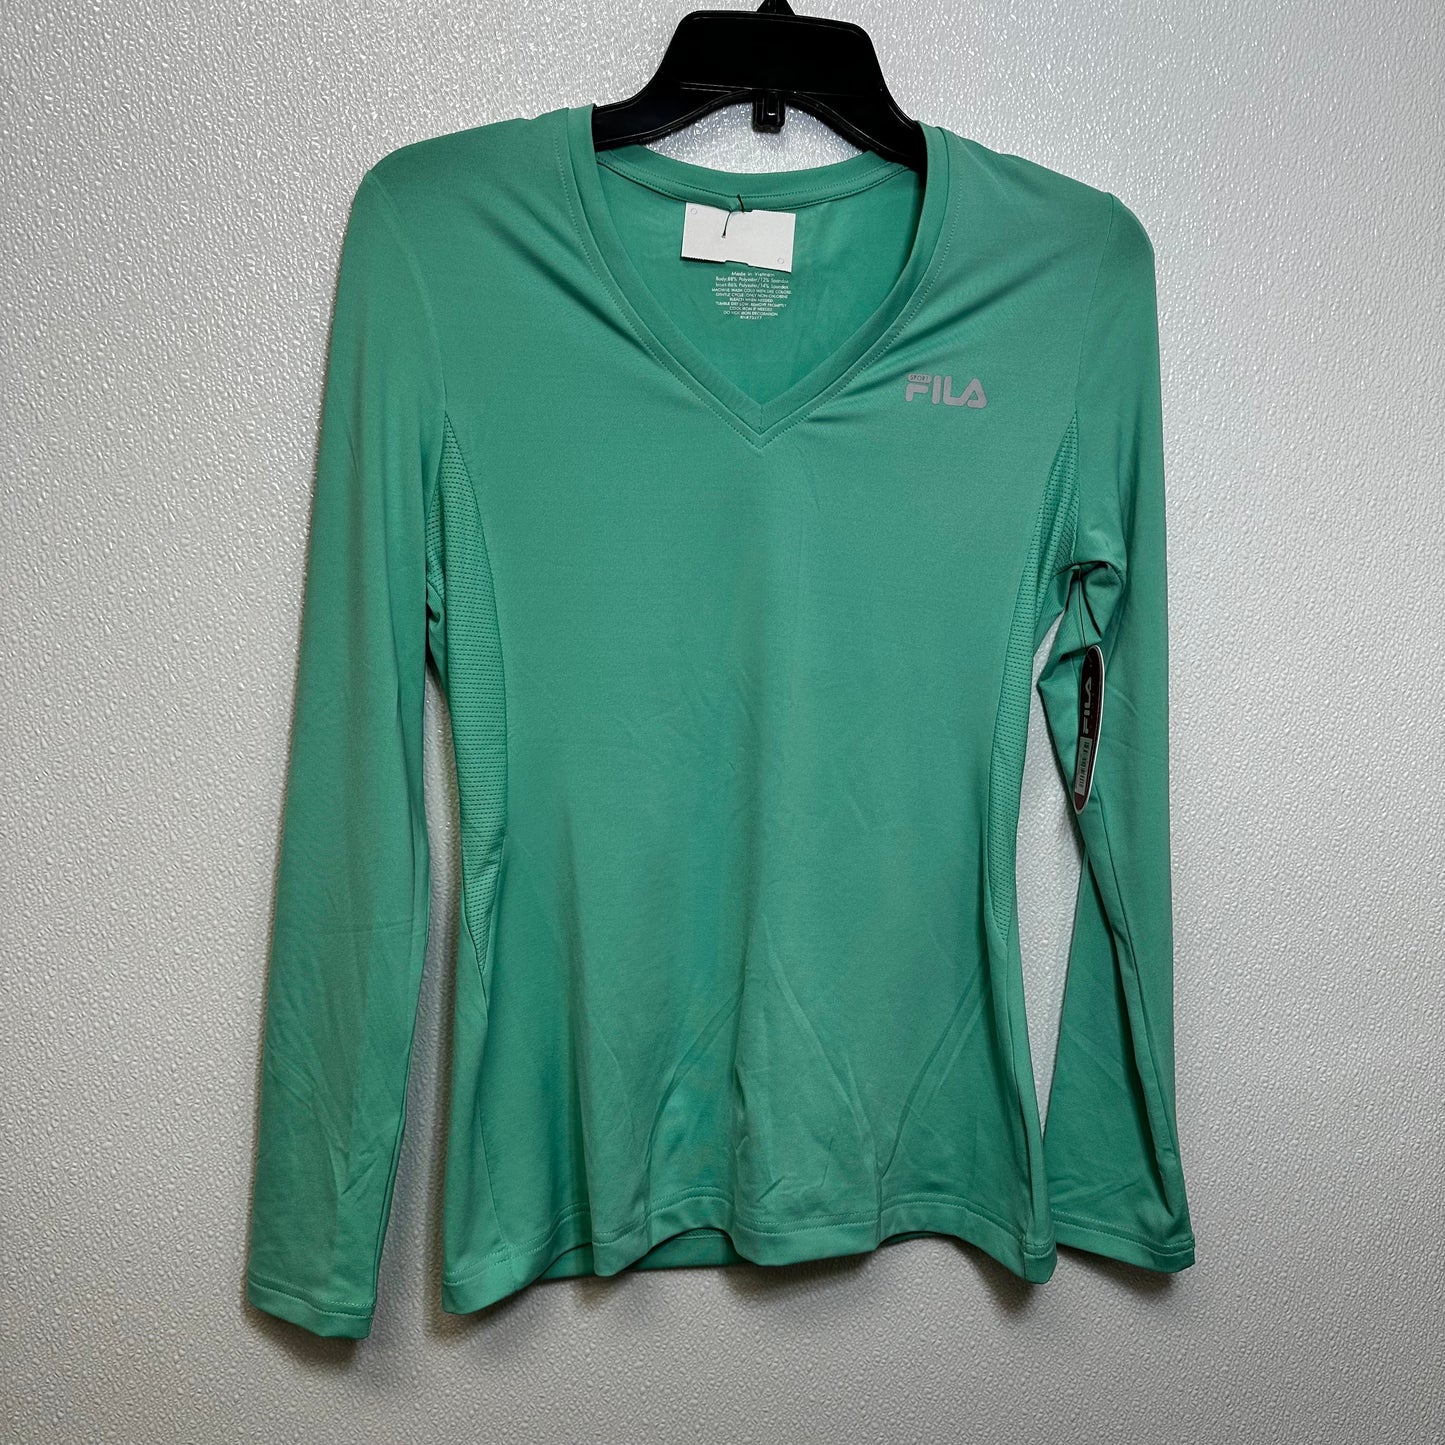 Green Athletic Top Long Sleeve Collar Fila, Size S